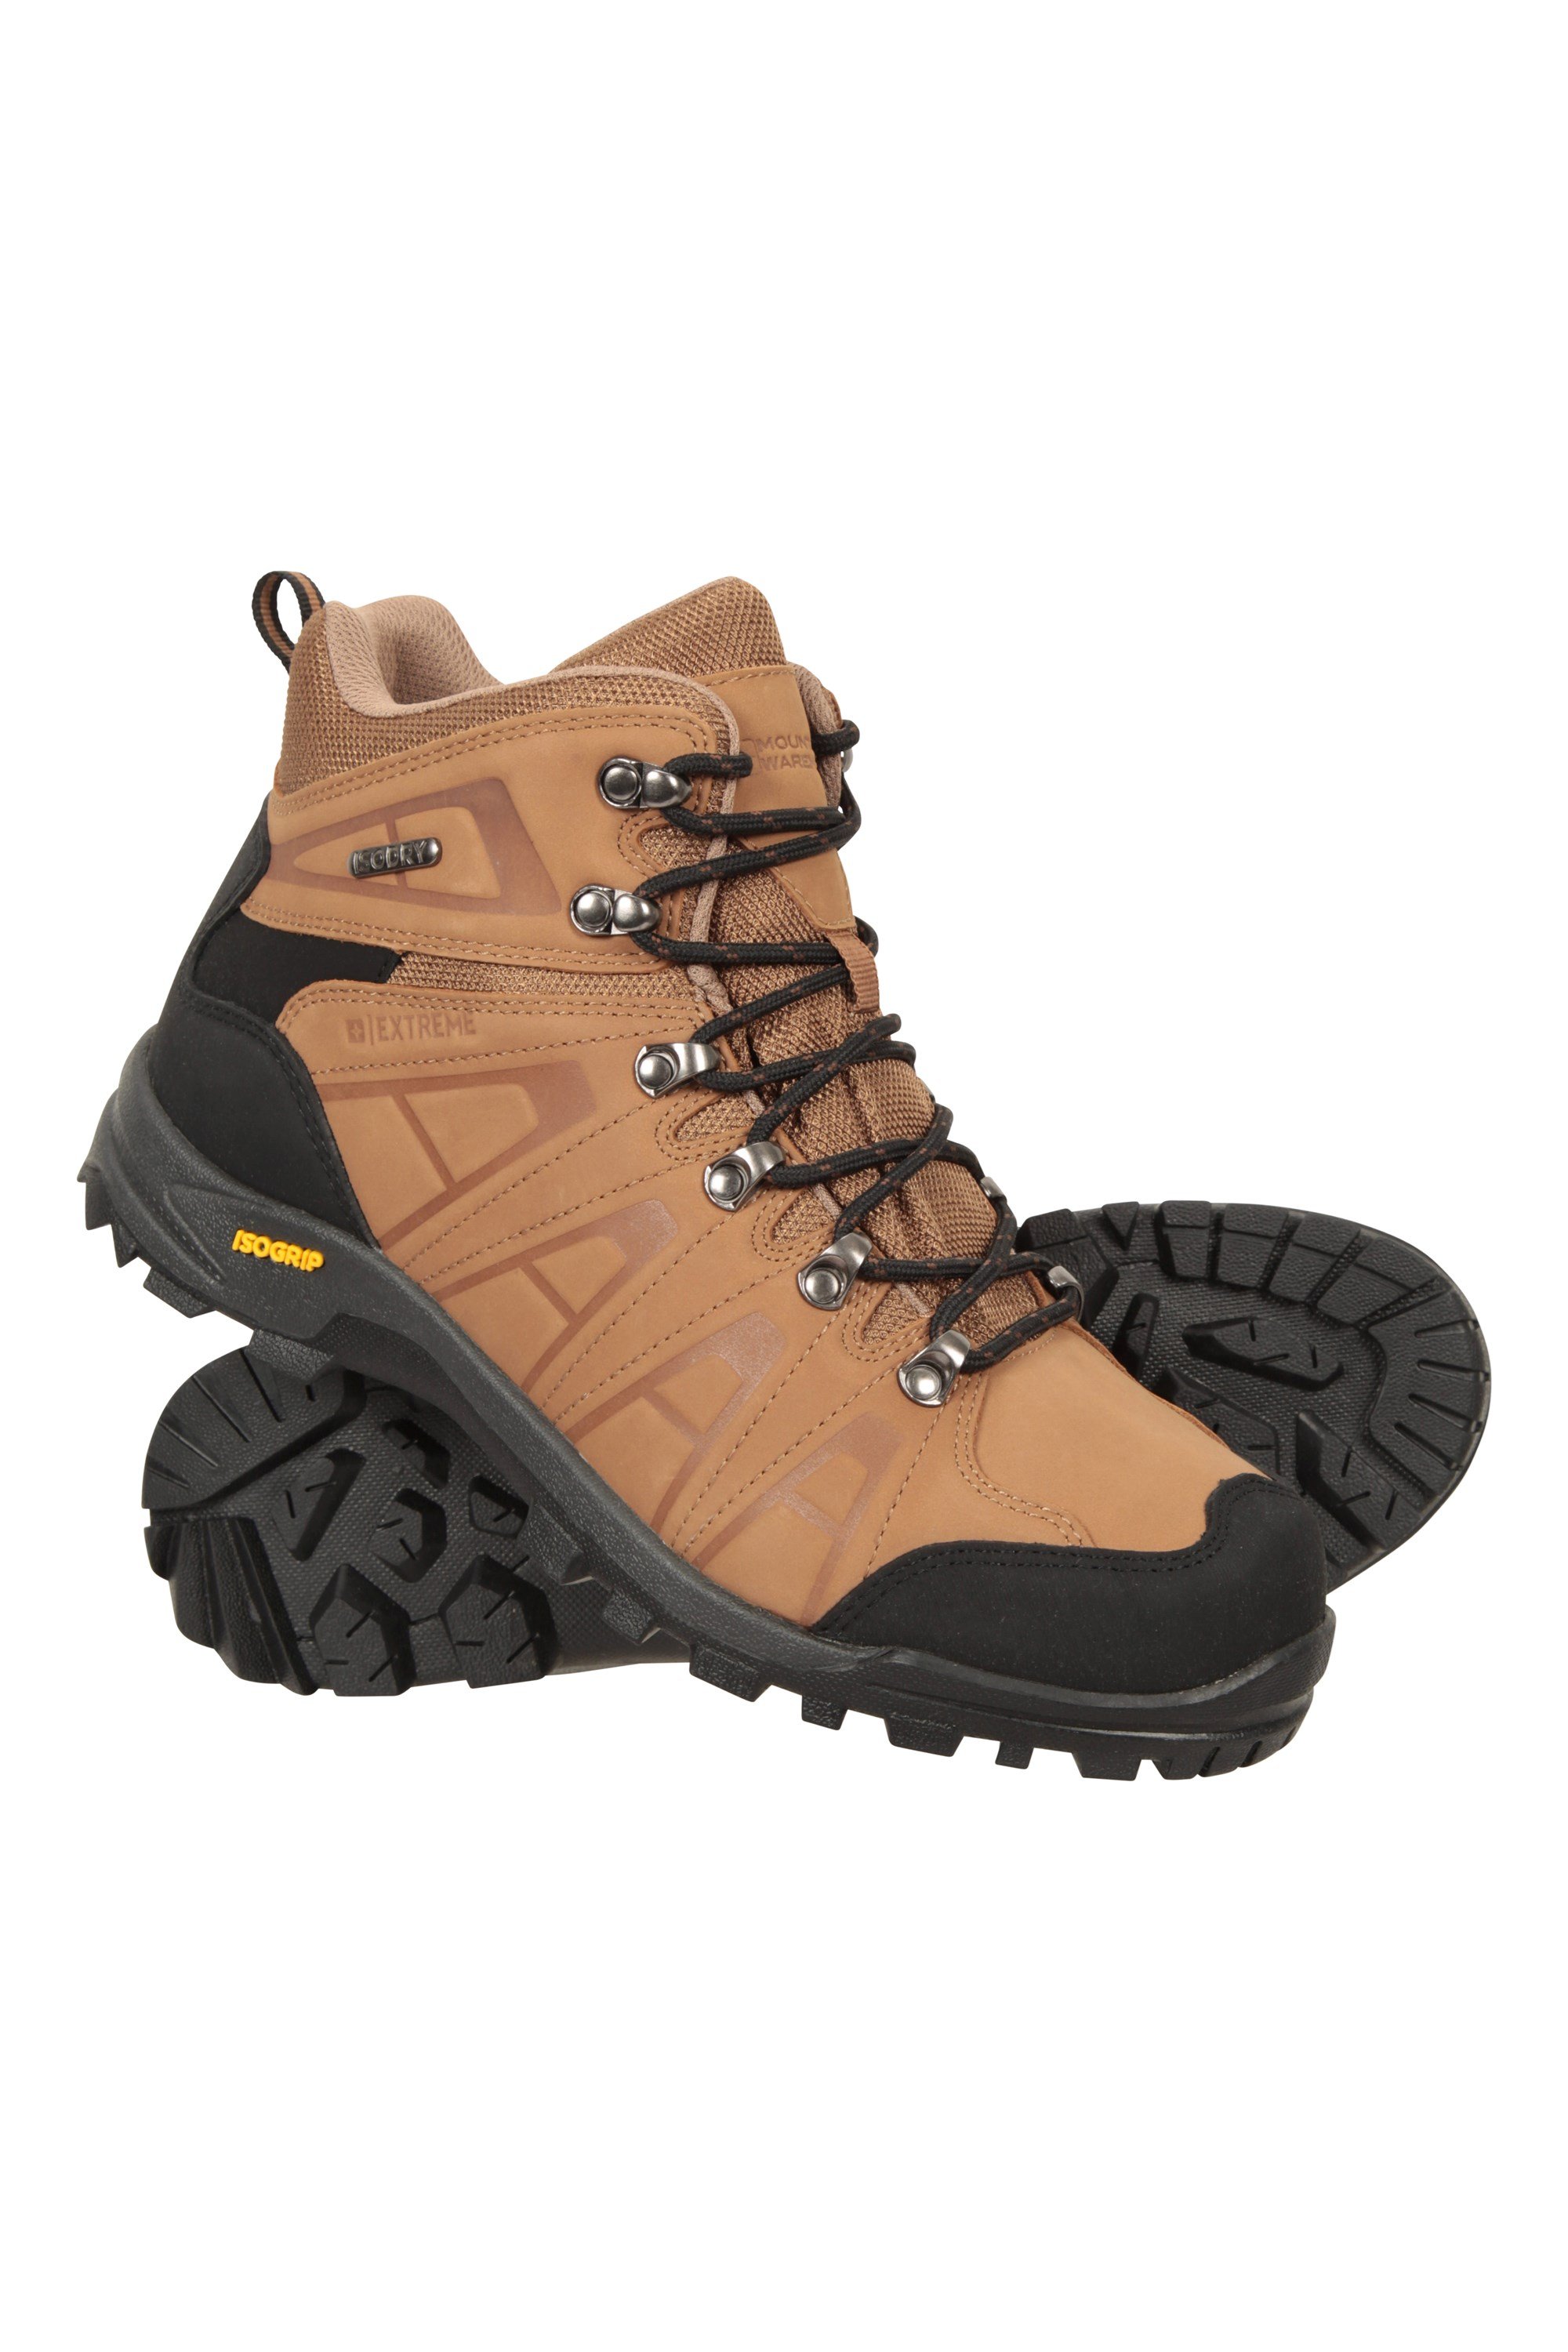 Hurricane Extreme Mens Isogrip Boots - Brown